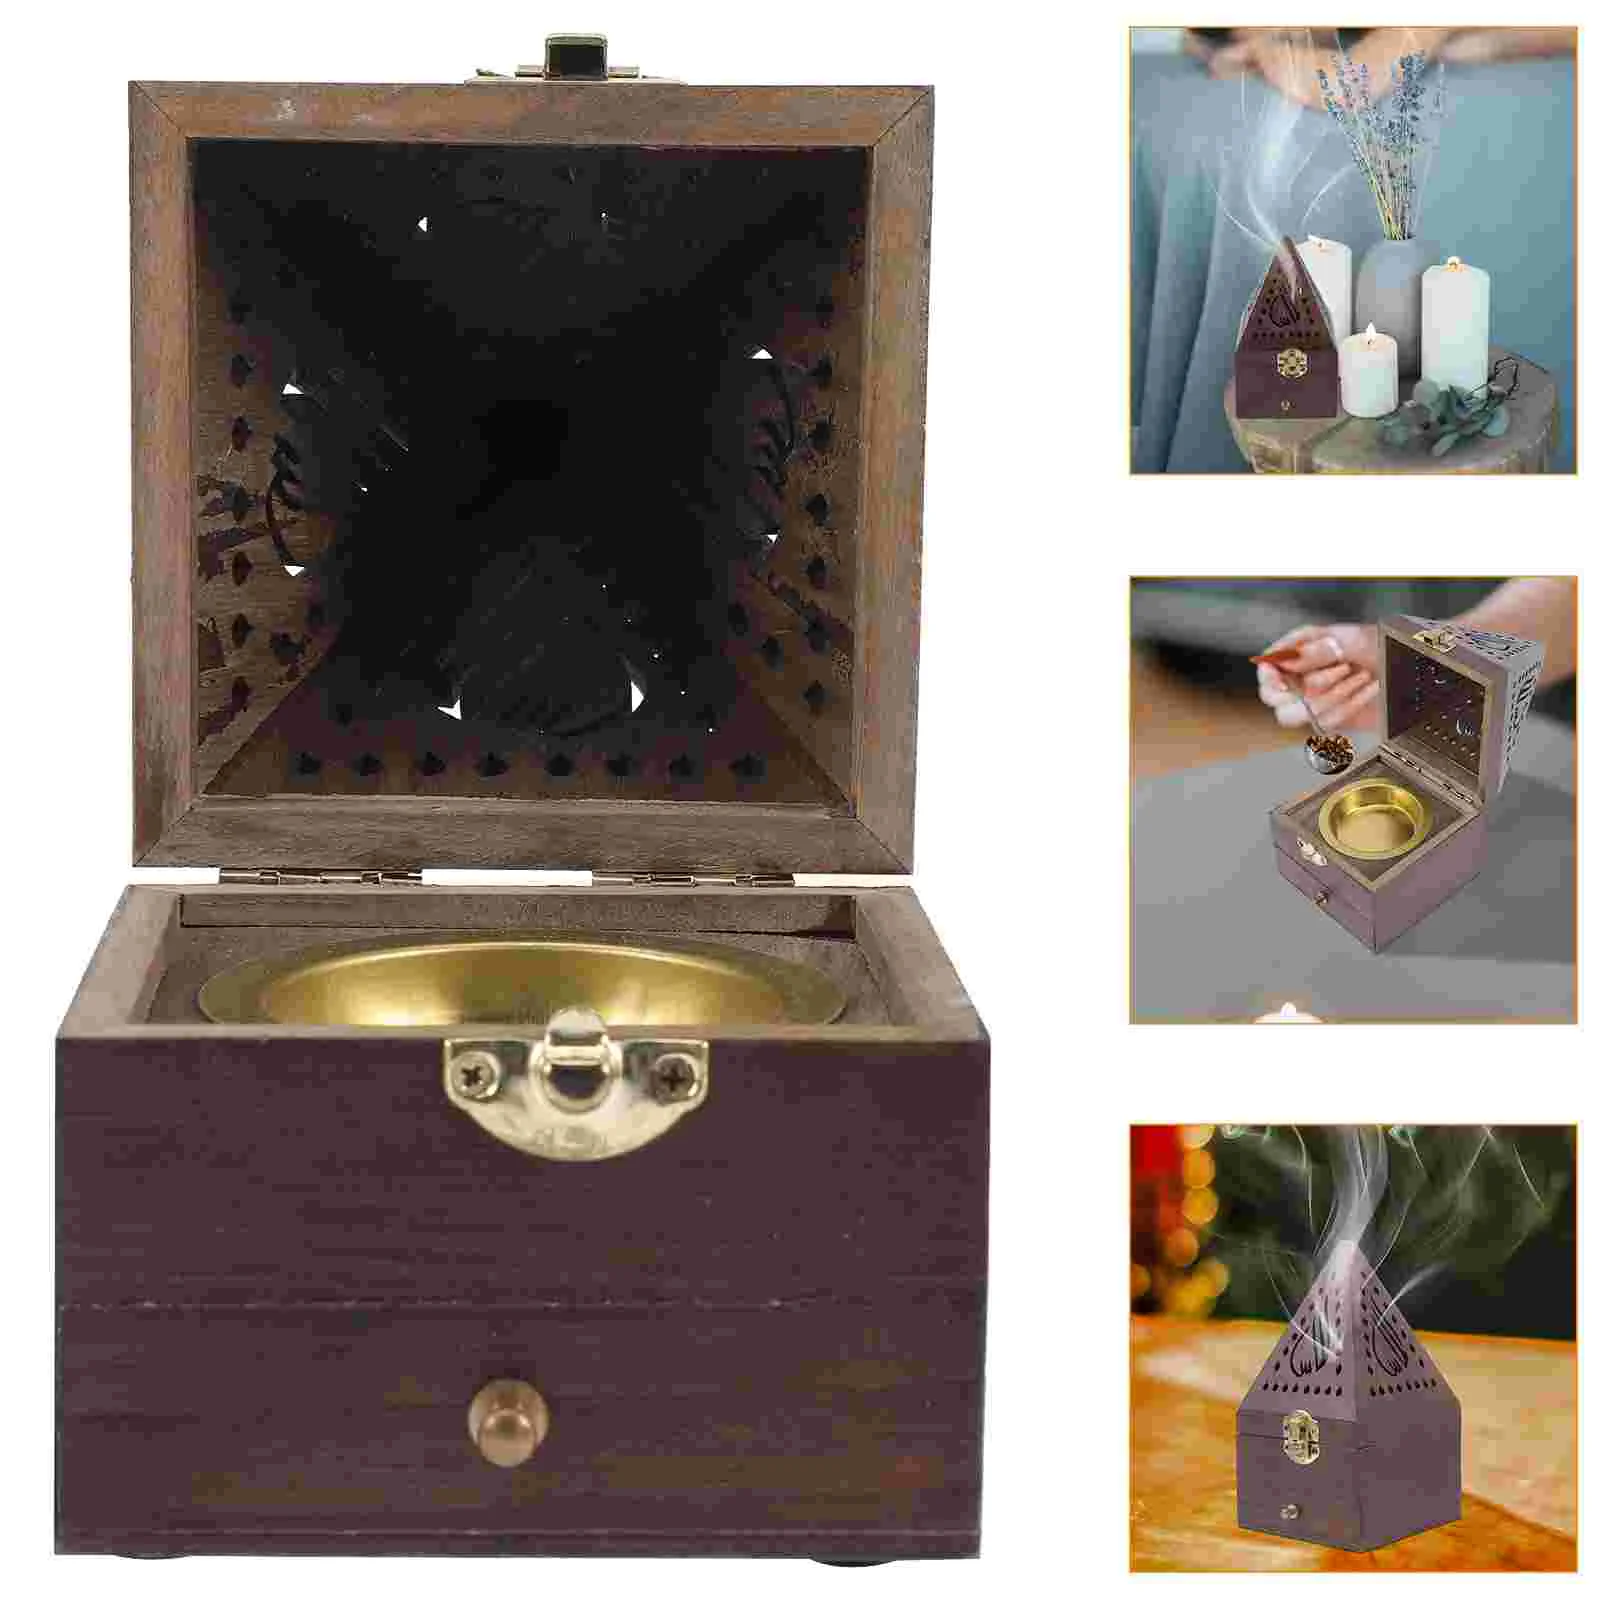 

Burner Holder Cone Wooden Temple Box Diffuser Ramadan Pyramid Mubarak Eid Charcoal Wood Aromatherapy Stick Resin Coil Container